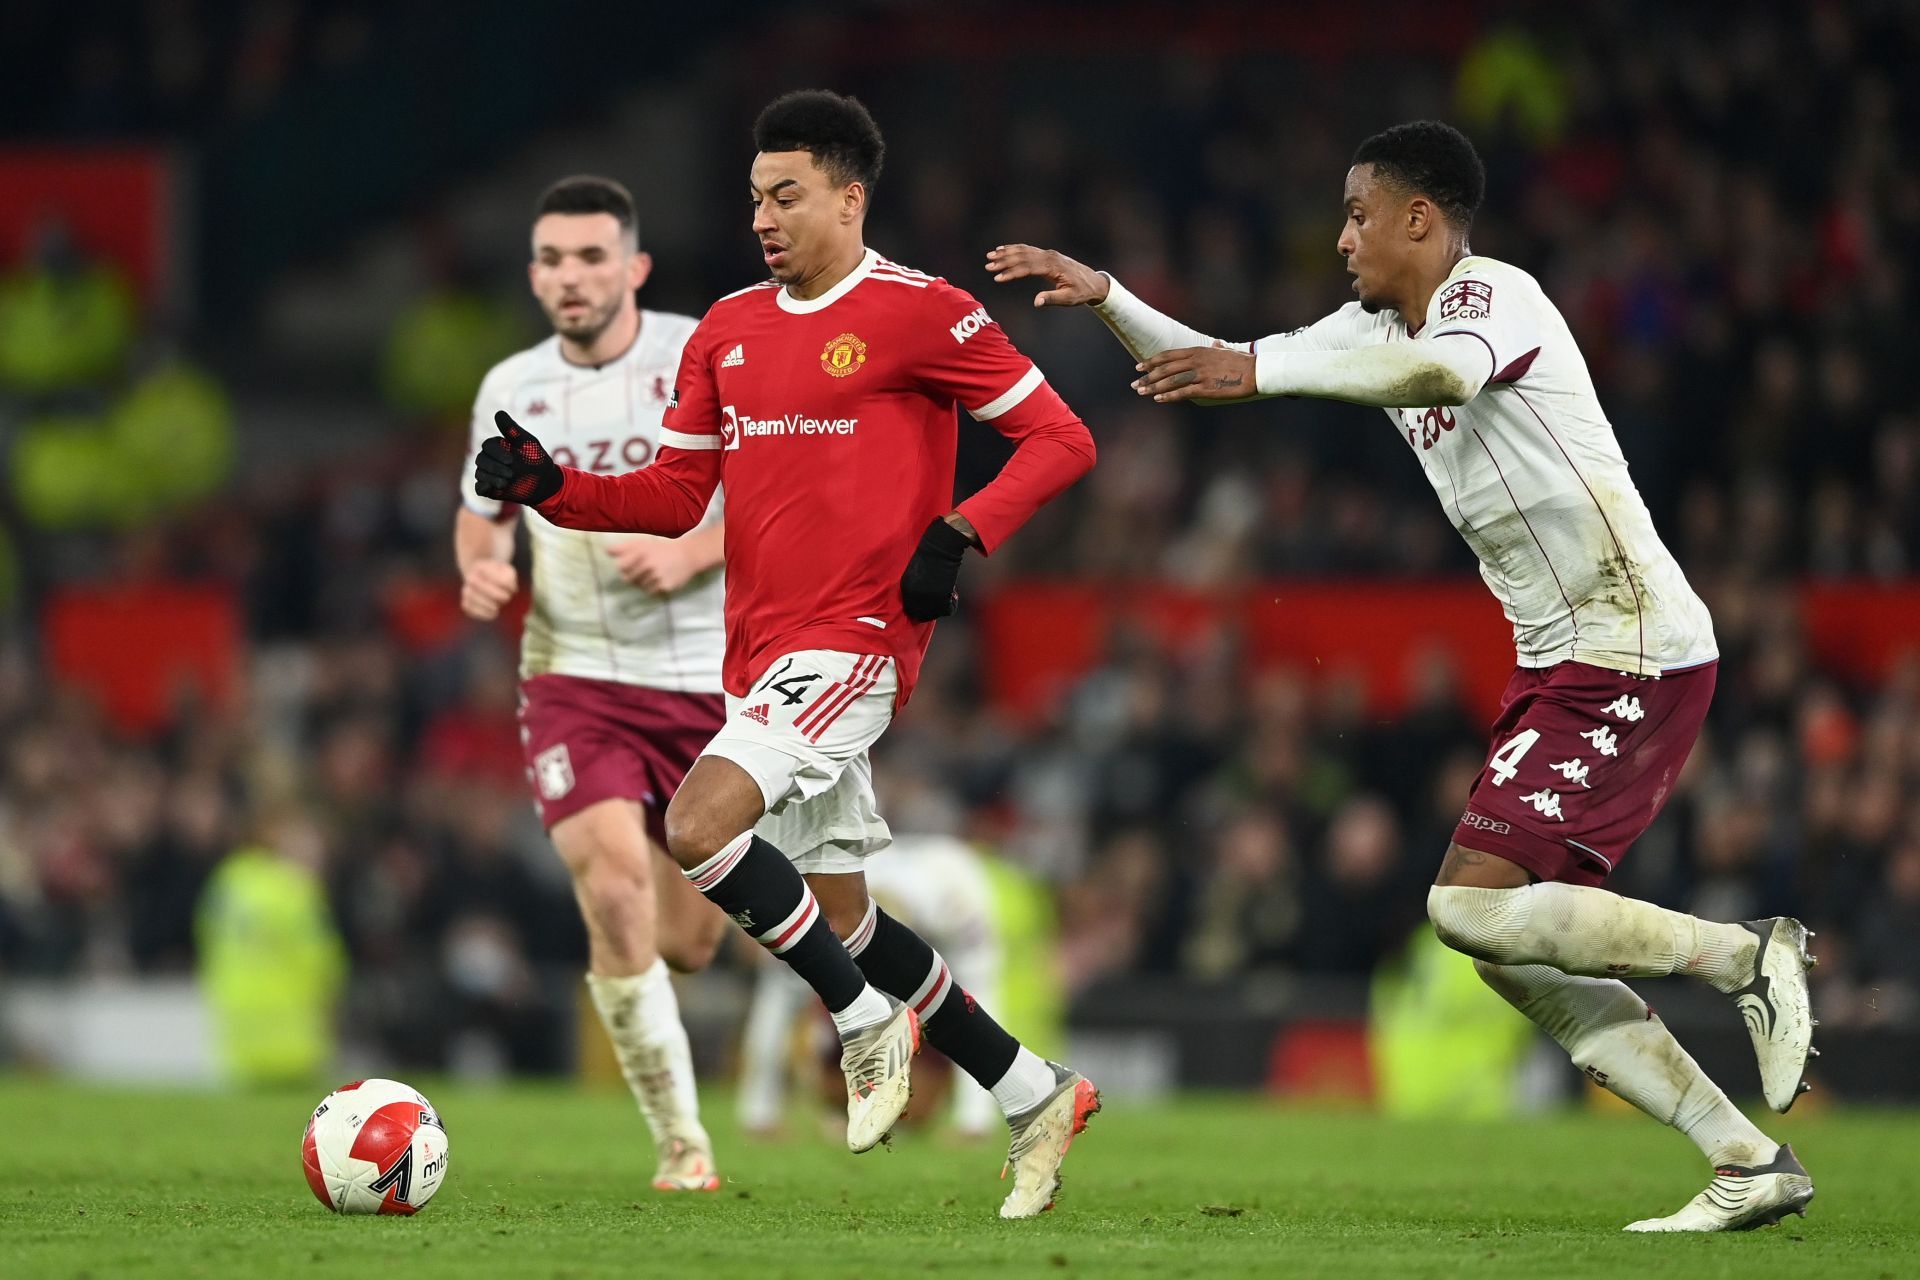 Lingard in action v Aston Villa: The Emirates FA Cup Third Round